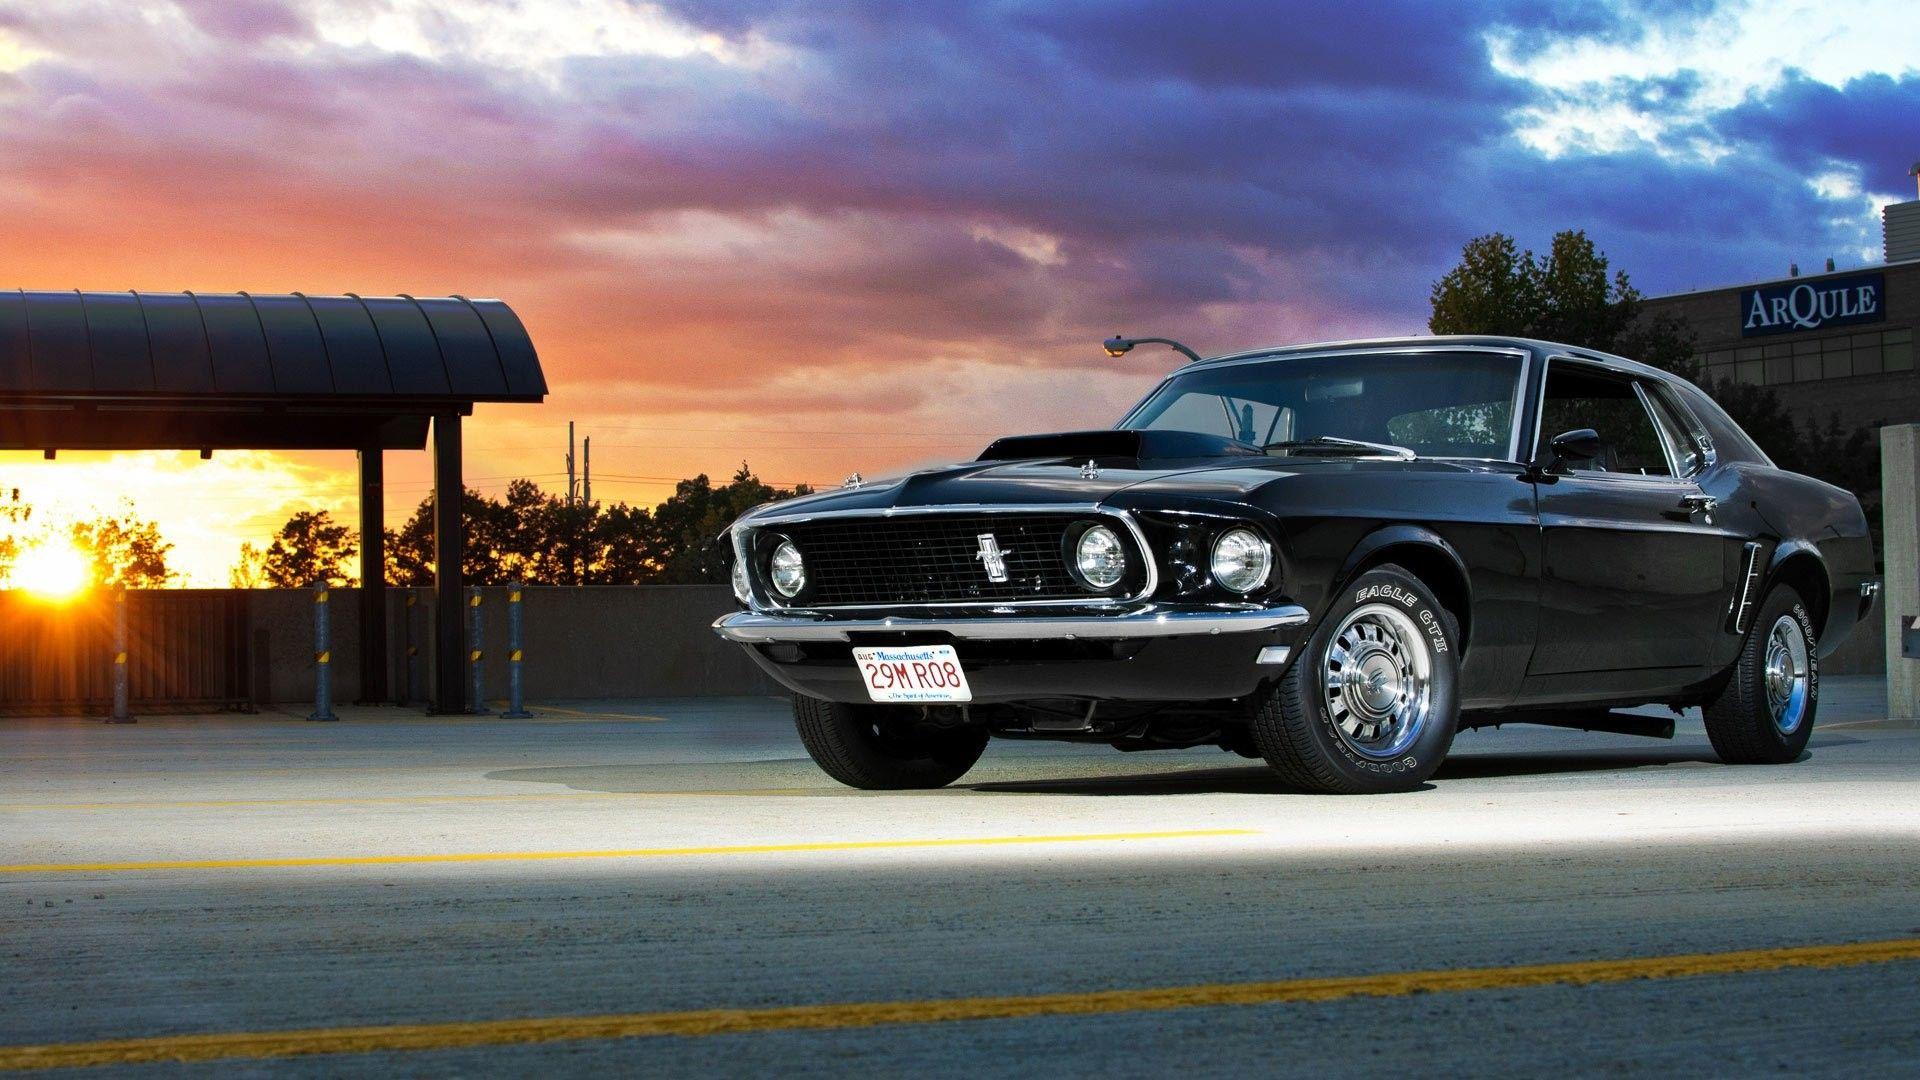 Old Mustang Wallpapers Top Free Old Mustang Backgrounds Wallpaperaccess